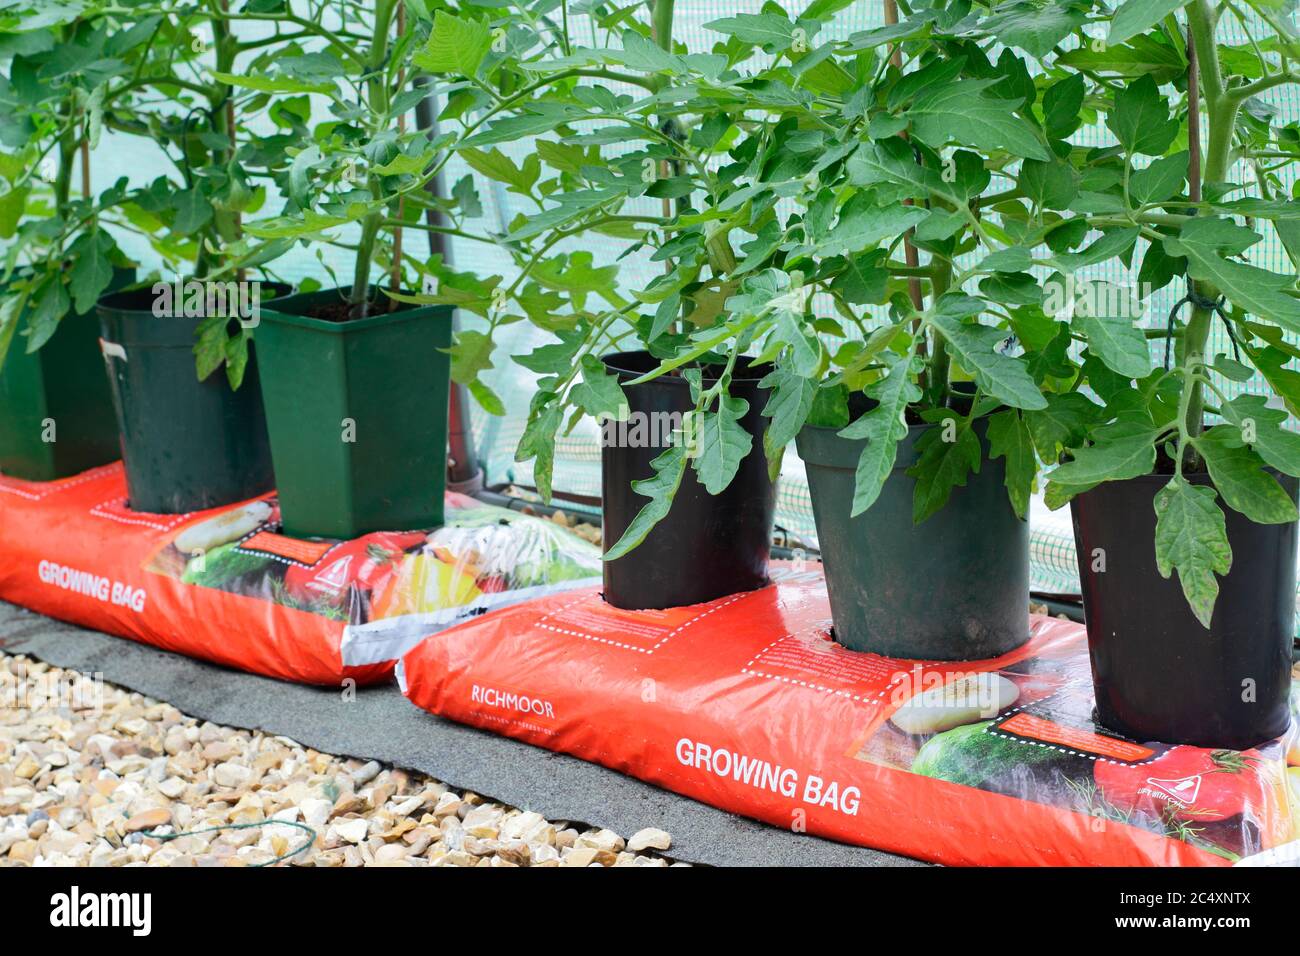 Solanum lycopersicum. Home grown tomato plants growing in bottomless pots placed in a grow bag to increase volume of compost available to the plant. Stock Photo